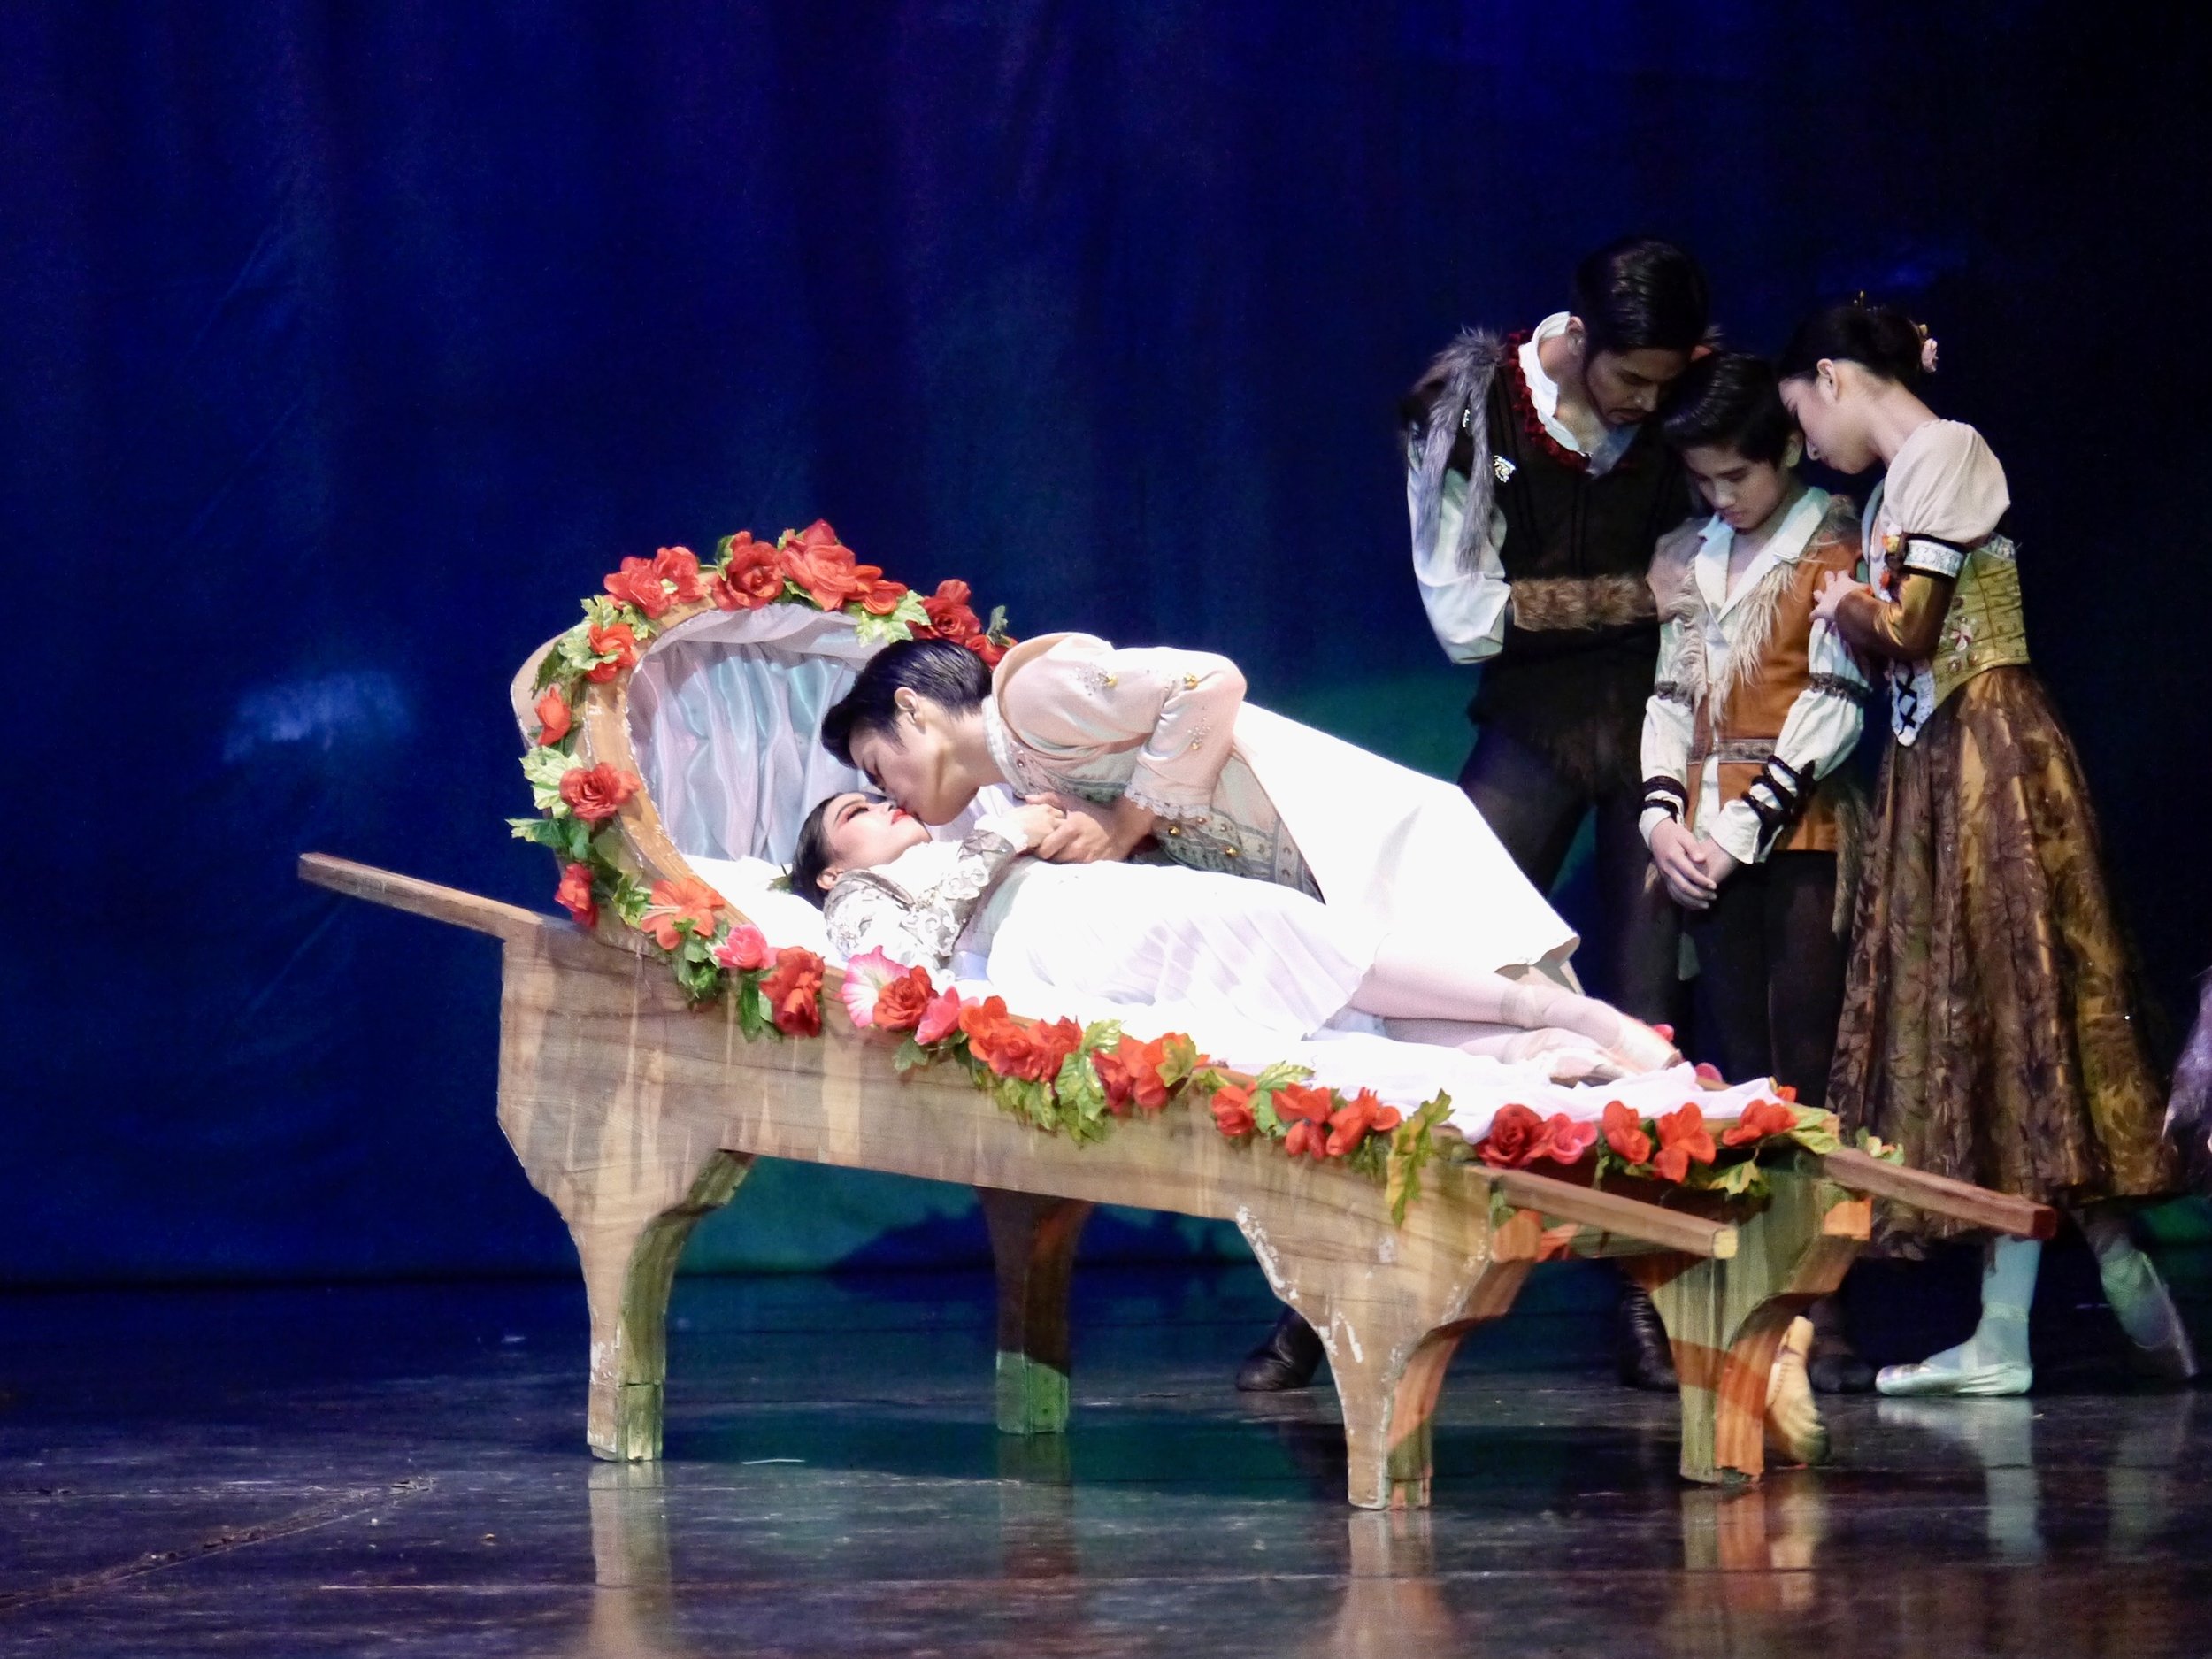    After taking a bite of the poisoned apple, the heroine in Lisa Macuja-Elizalde’s  Snow White  (Joan Emery Sia), restaged in 2019, falls into a sleeping death. Laid on a flower-bedecked resting place in the middle of a forest, the huntsman and his 